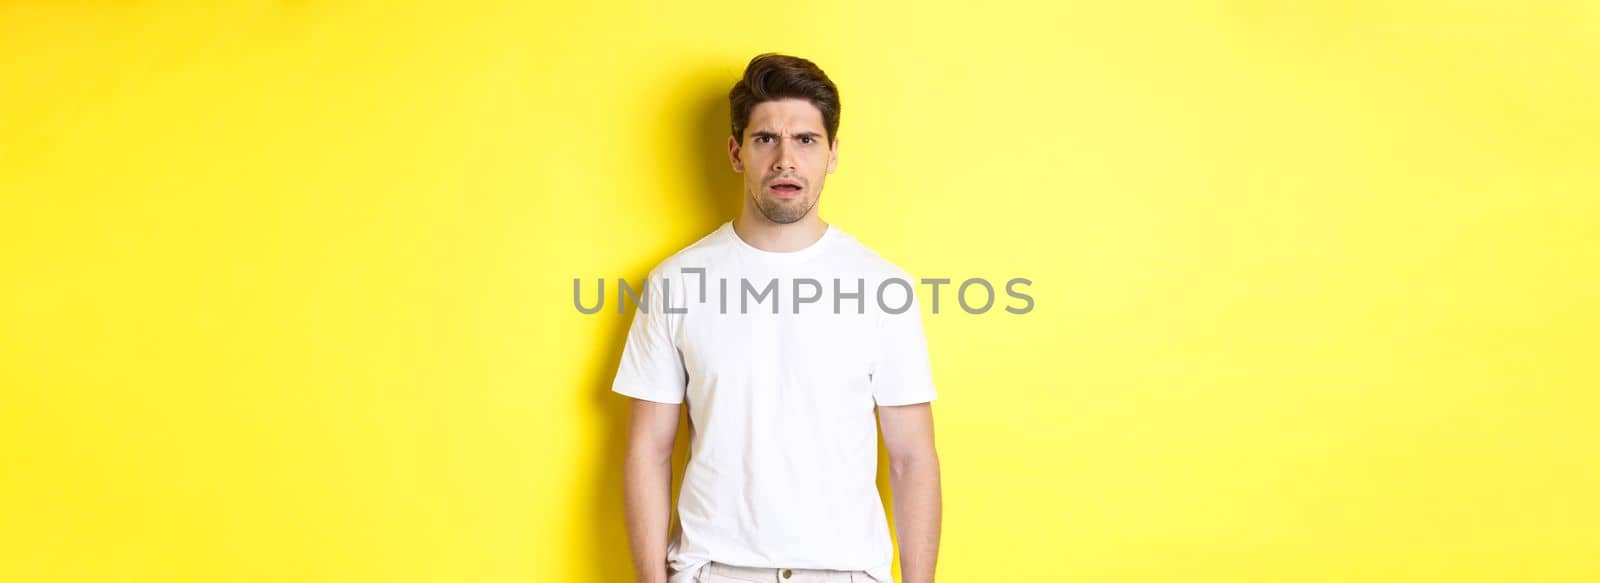 Image of confused and puzzled man cant understand something, frowning and looking shocked, standing over yellow background.